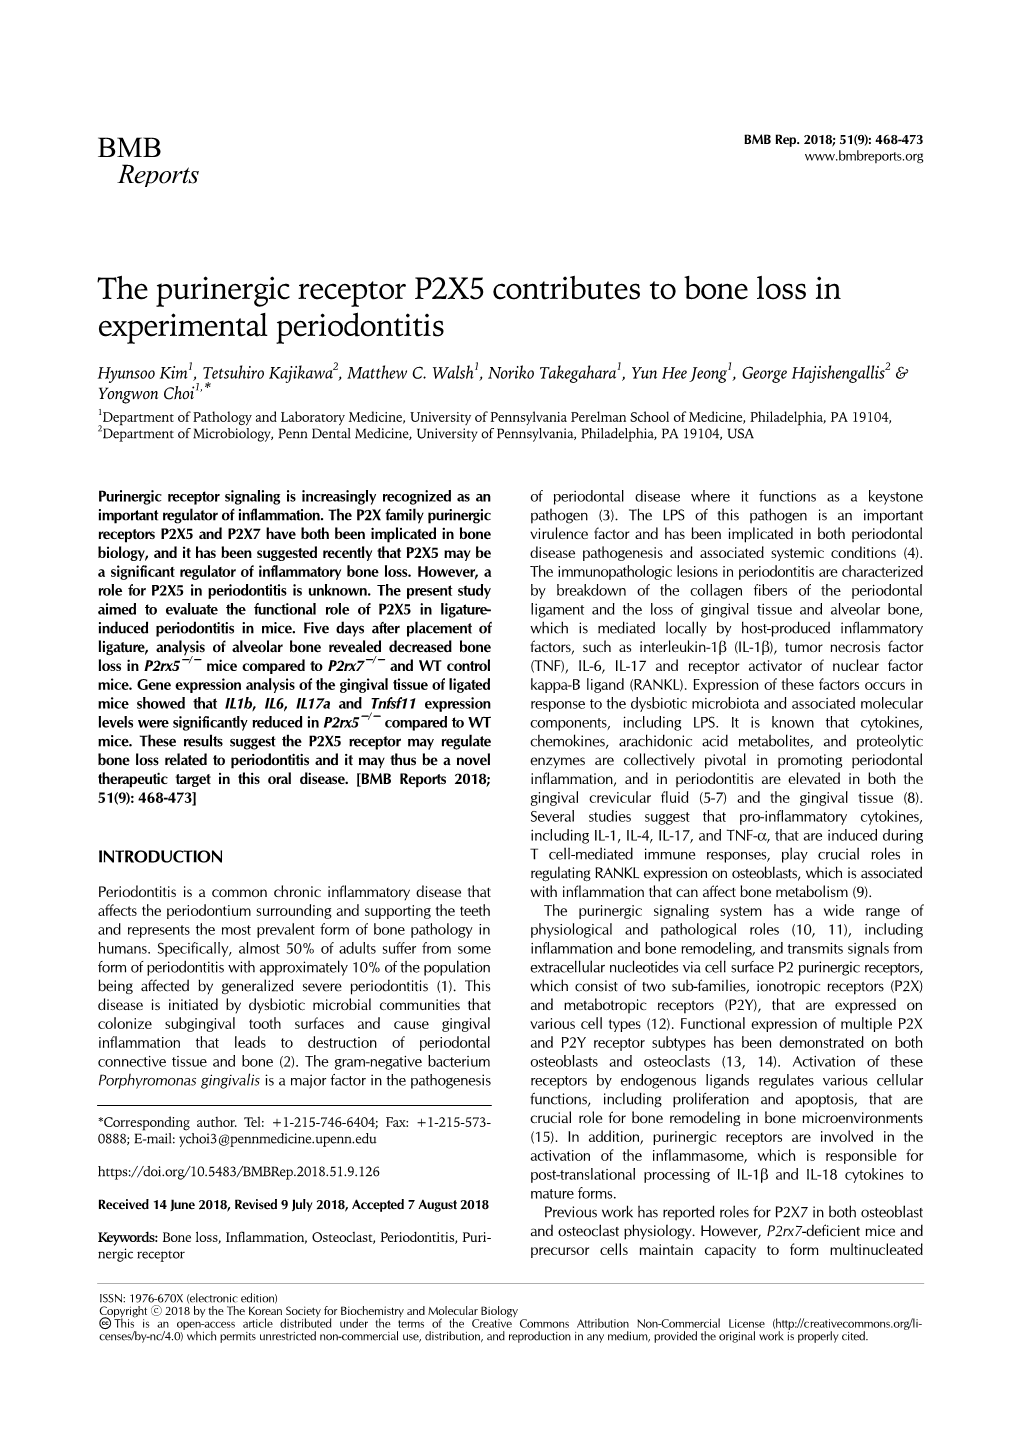 The Purinergic Receptor P2X5 Contributes to Bone Loss in Experimental Periodontitis